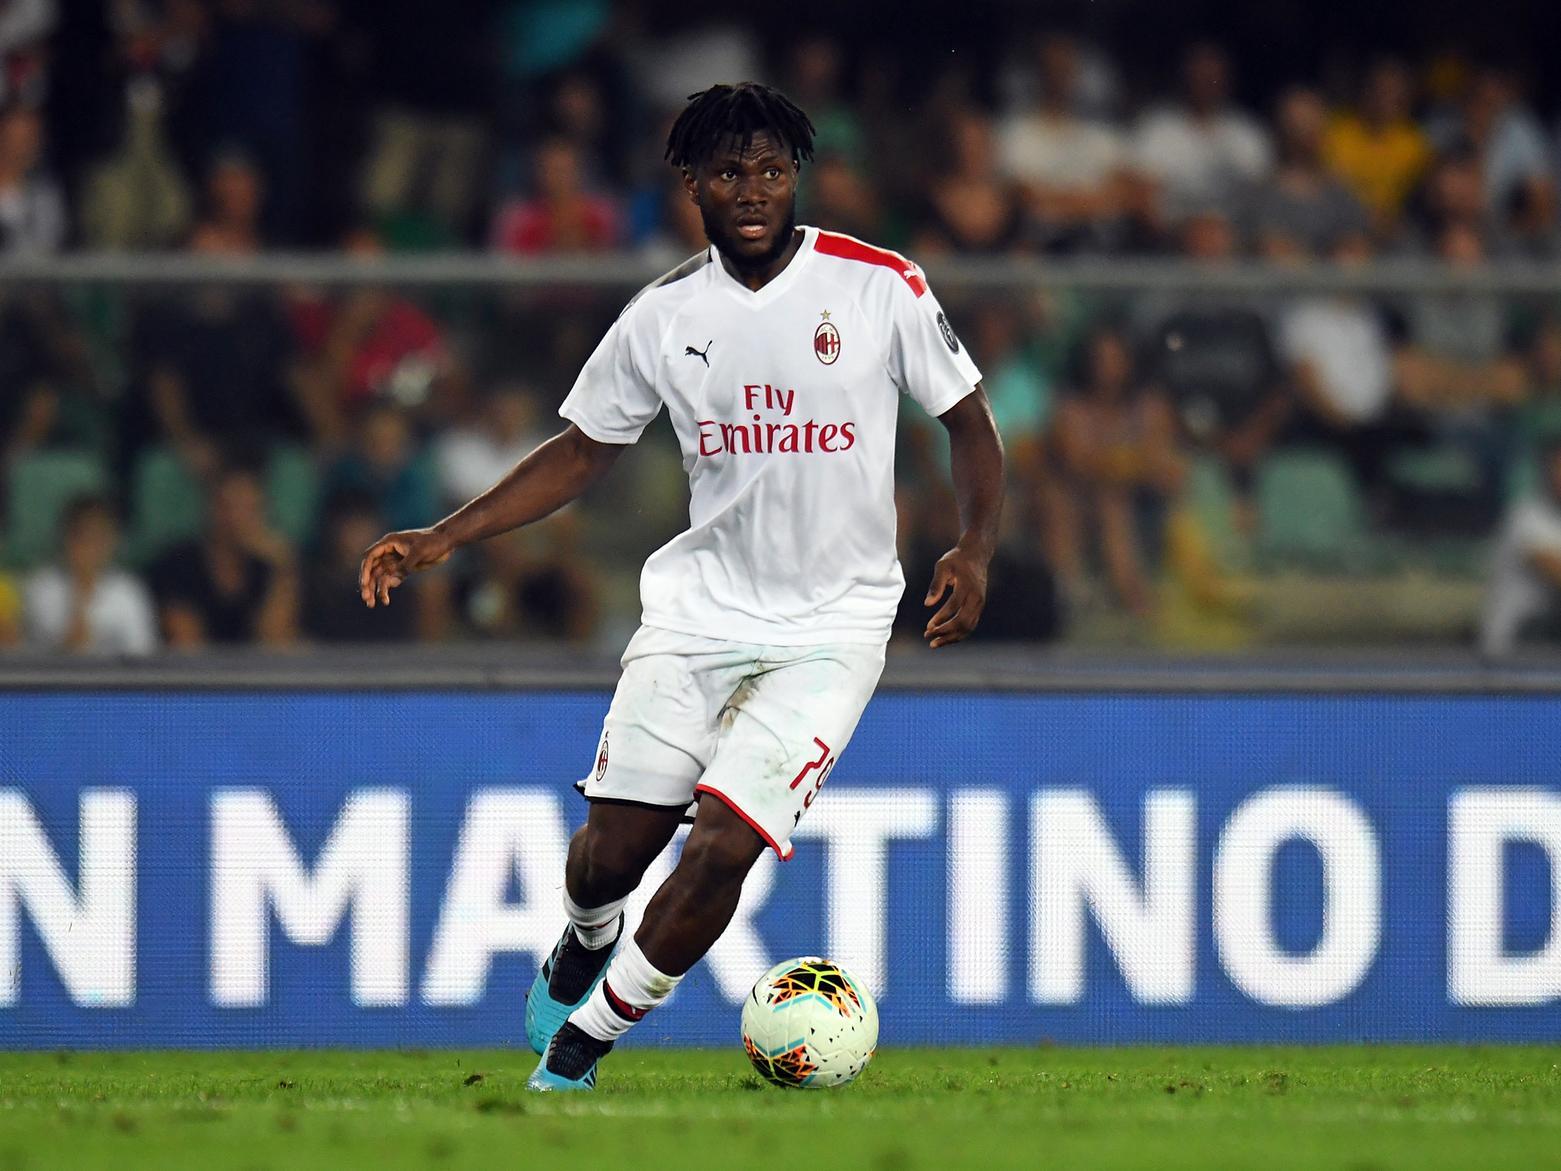 The AC Milan midfielder is 10/1 to sign for the Gunners this month - despite heavy speculation that he’s bound for Tottenham.